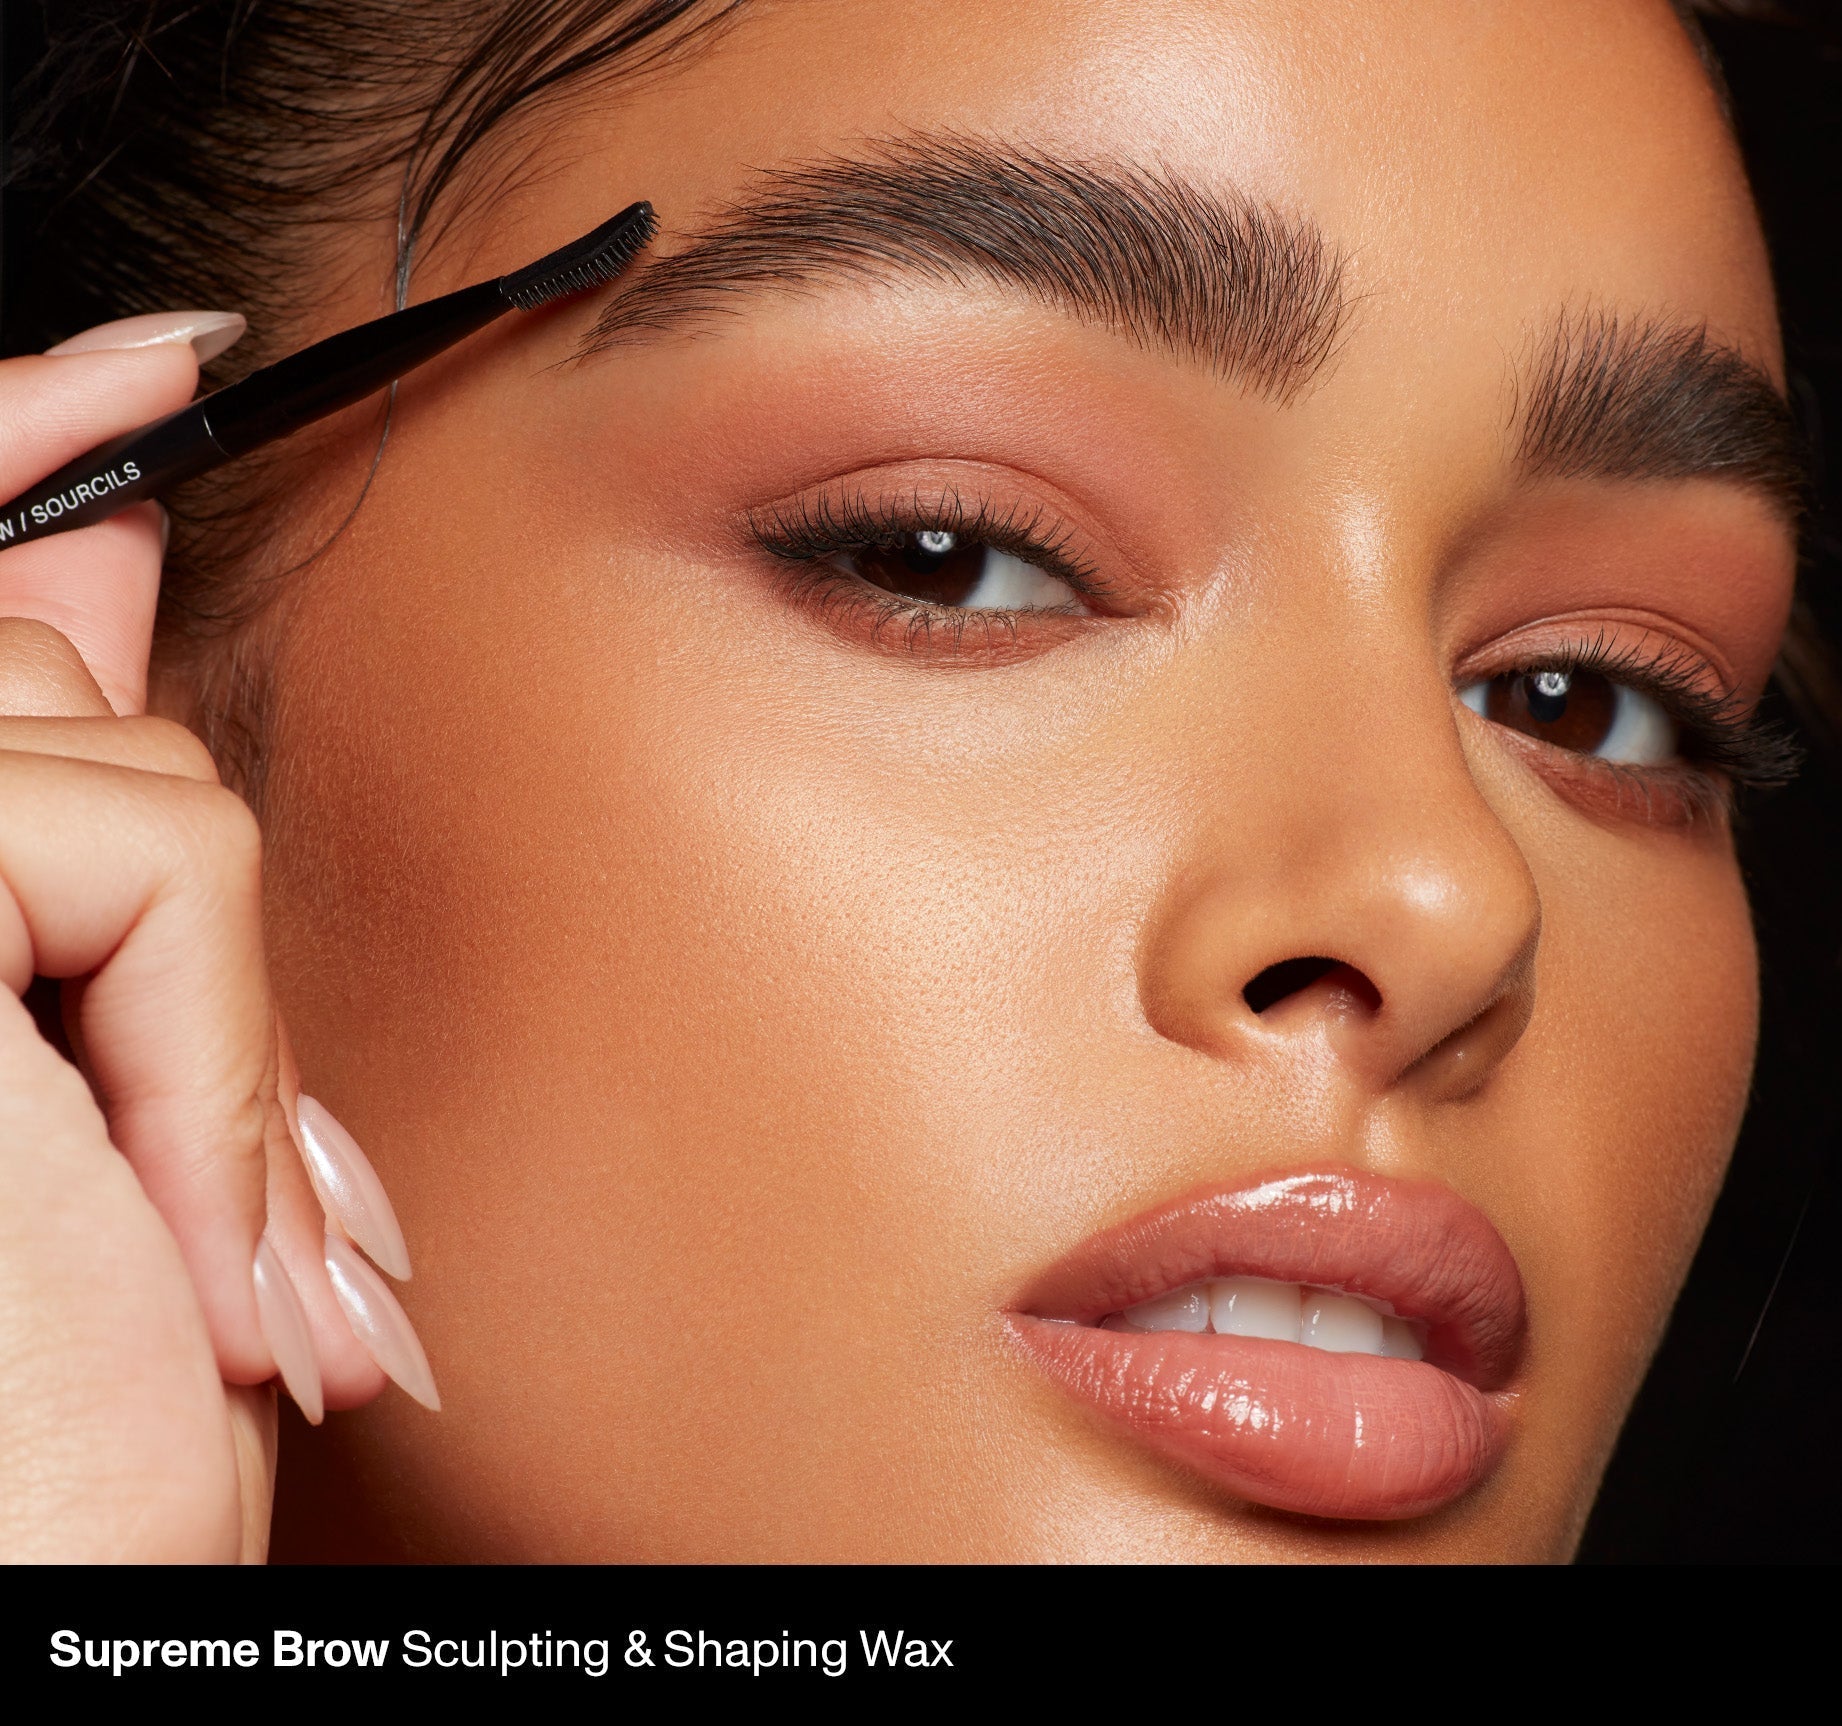 Morphe, Supreme Brow Sculpting And Shaping Wax